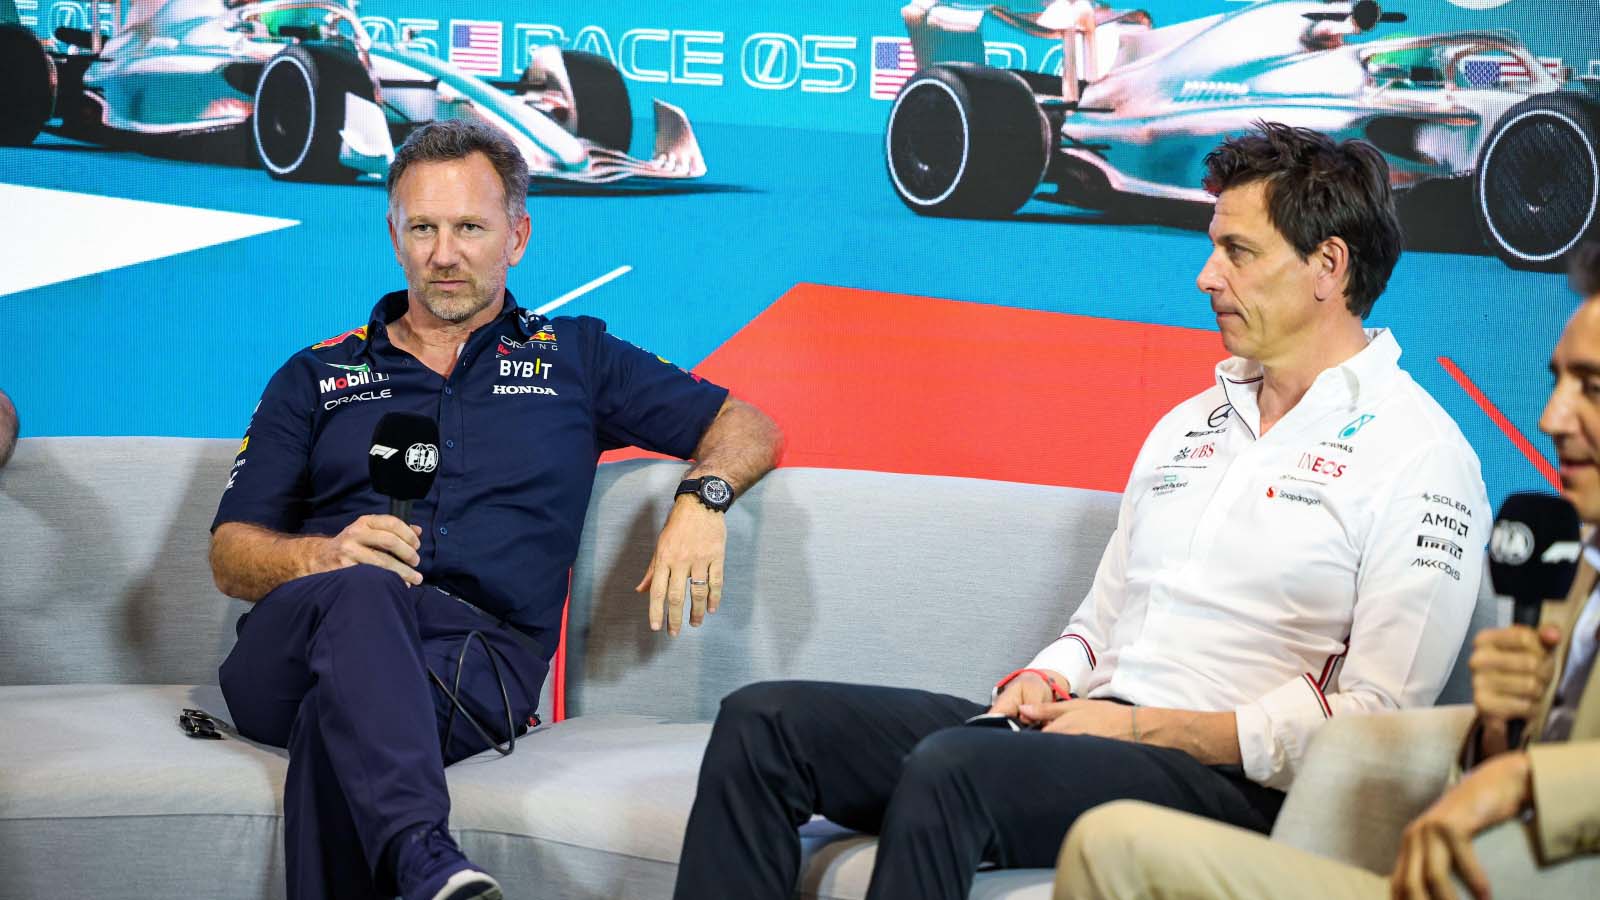 In F1 Title Race, Horner Brushes Off Wolff's Claims